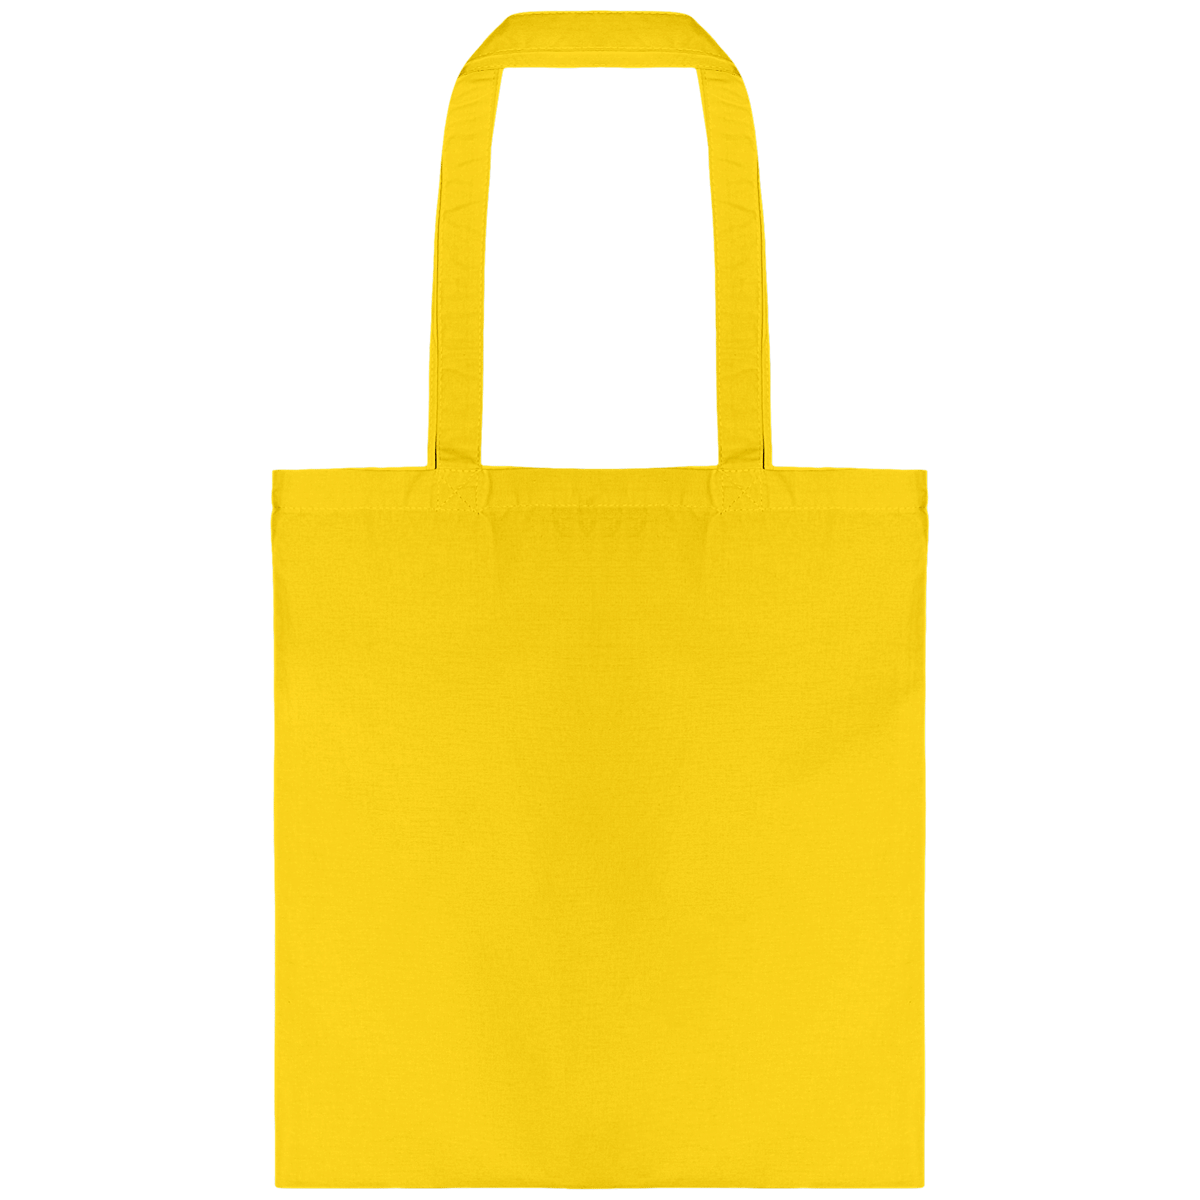 Personalize Your Tote Bag With Tunetoo Yellow